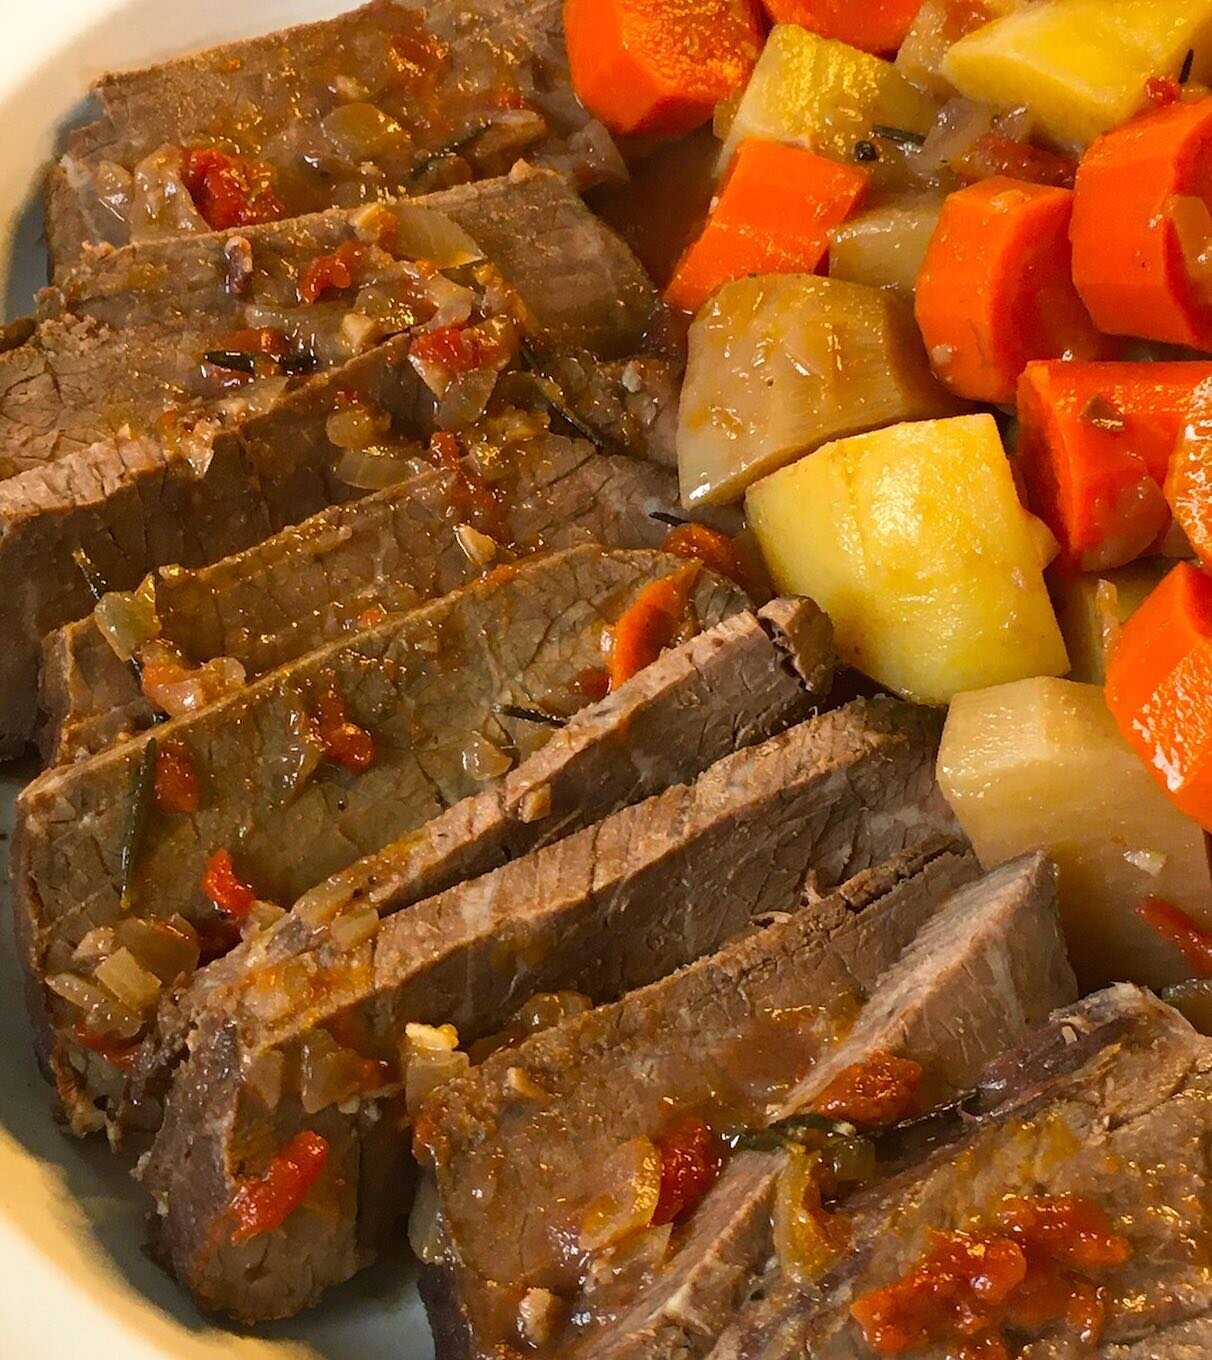 Warm up a cold night with this hearty classic meal: our recipe of the week for Pot Roast with Porcini and Root Vegetables. It&rsquo;s slow-cooked, savory comfort food at its best. Recipe by Toni Lydecker from her book &ldquo;Piatto Unico: When One Co